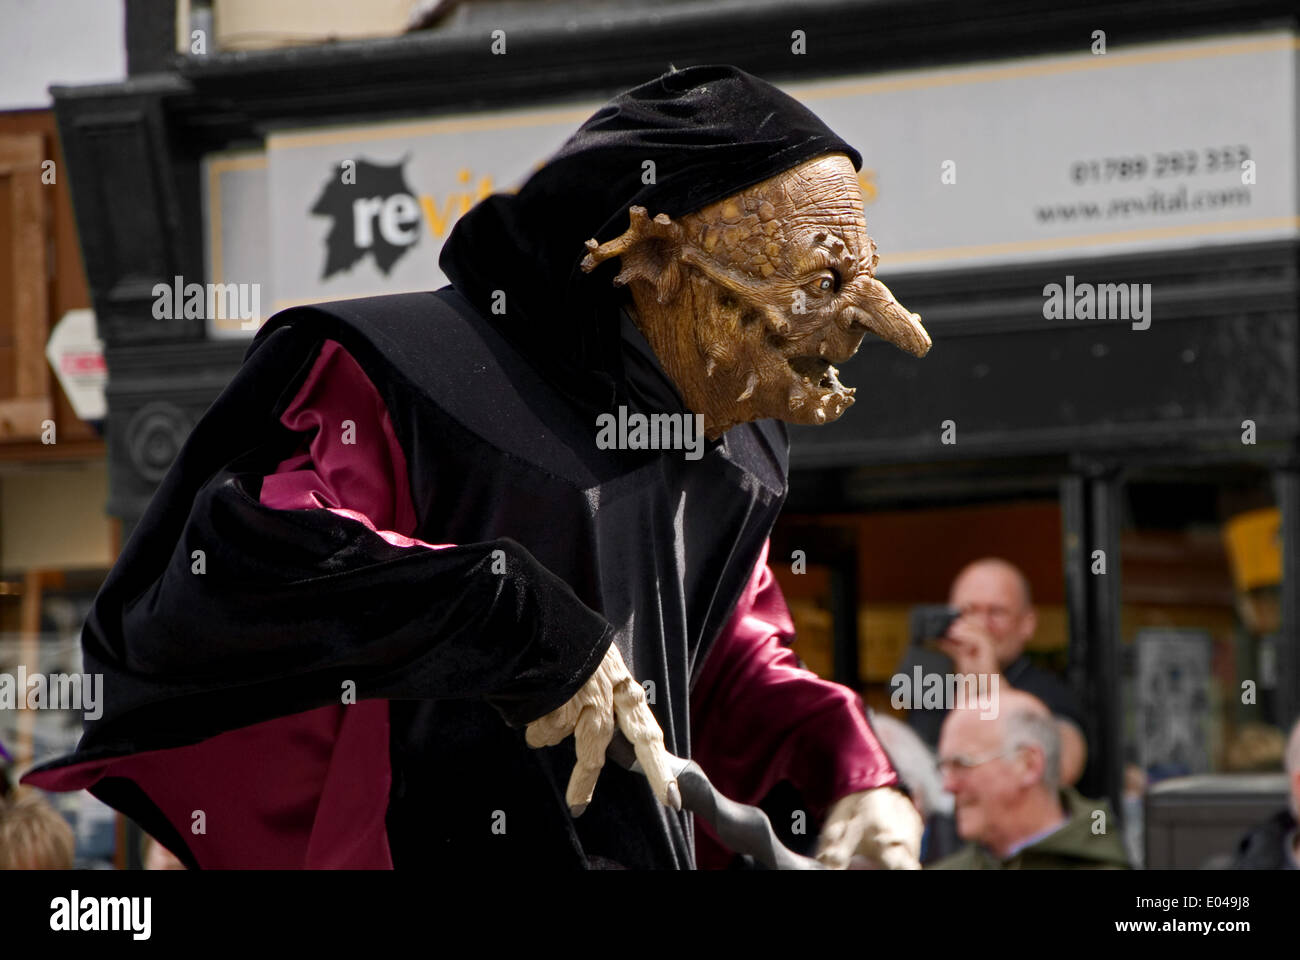 Costumed people as the witches from Macbeth, during William Shakespeare birthday celebrations. Stock Photo